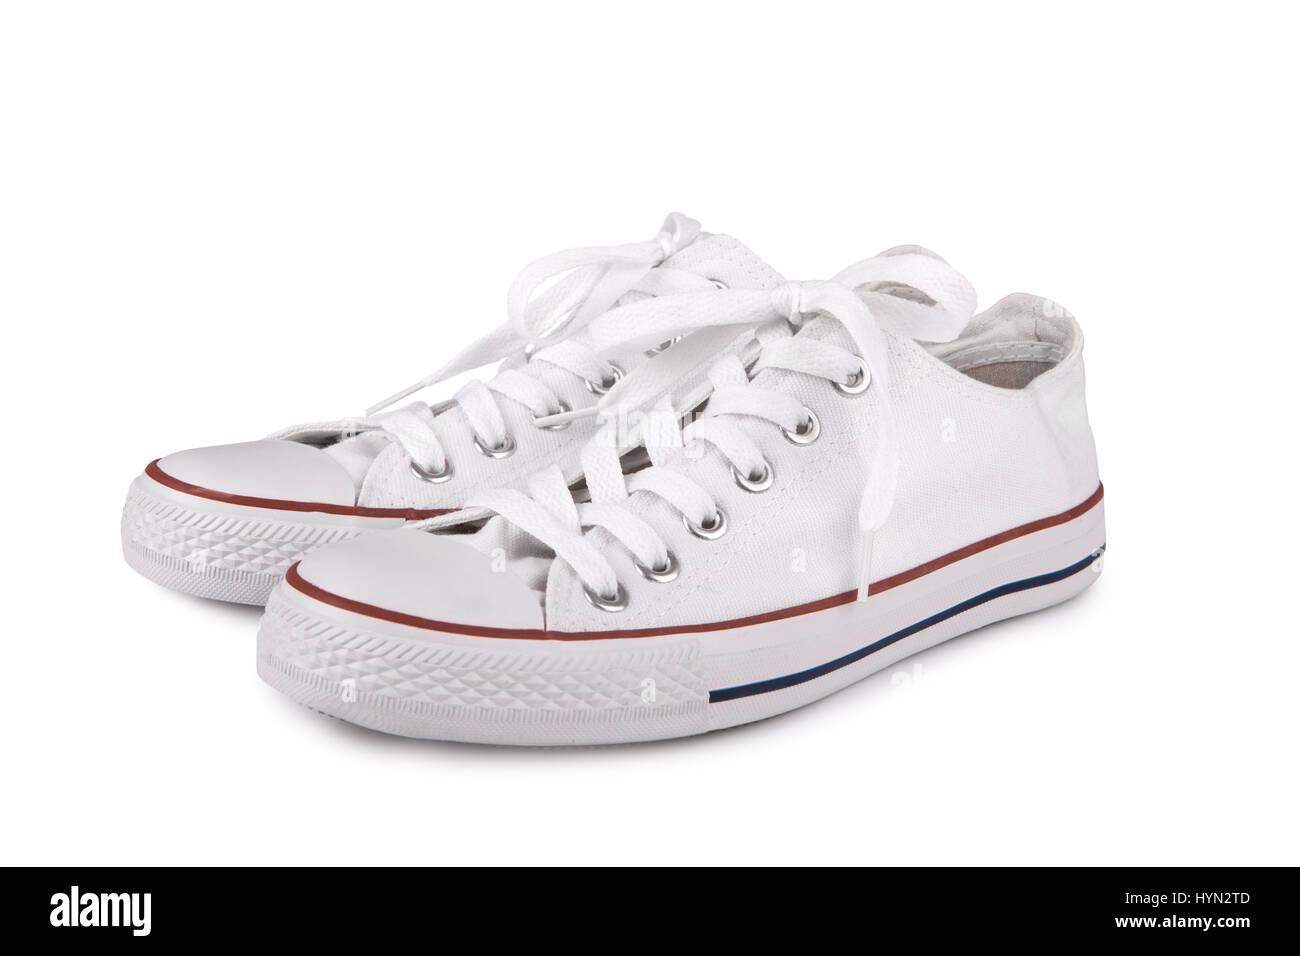 Pair of new white sneakers on white background Stock Photo